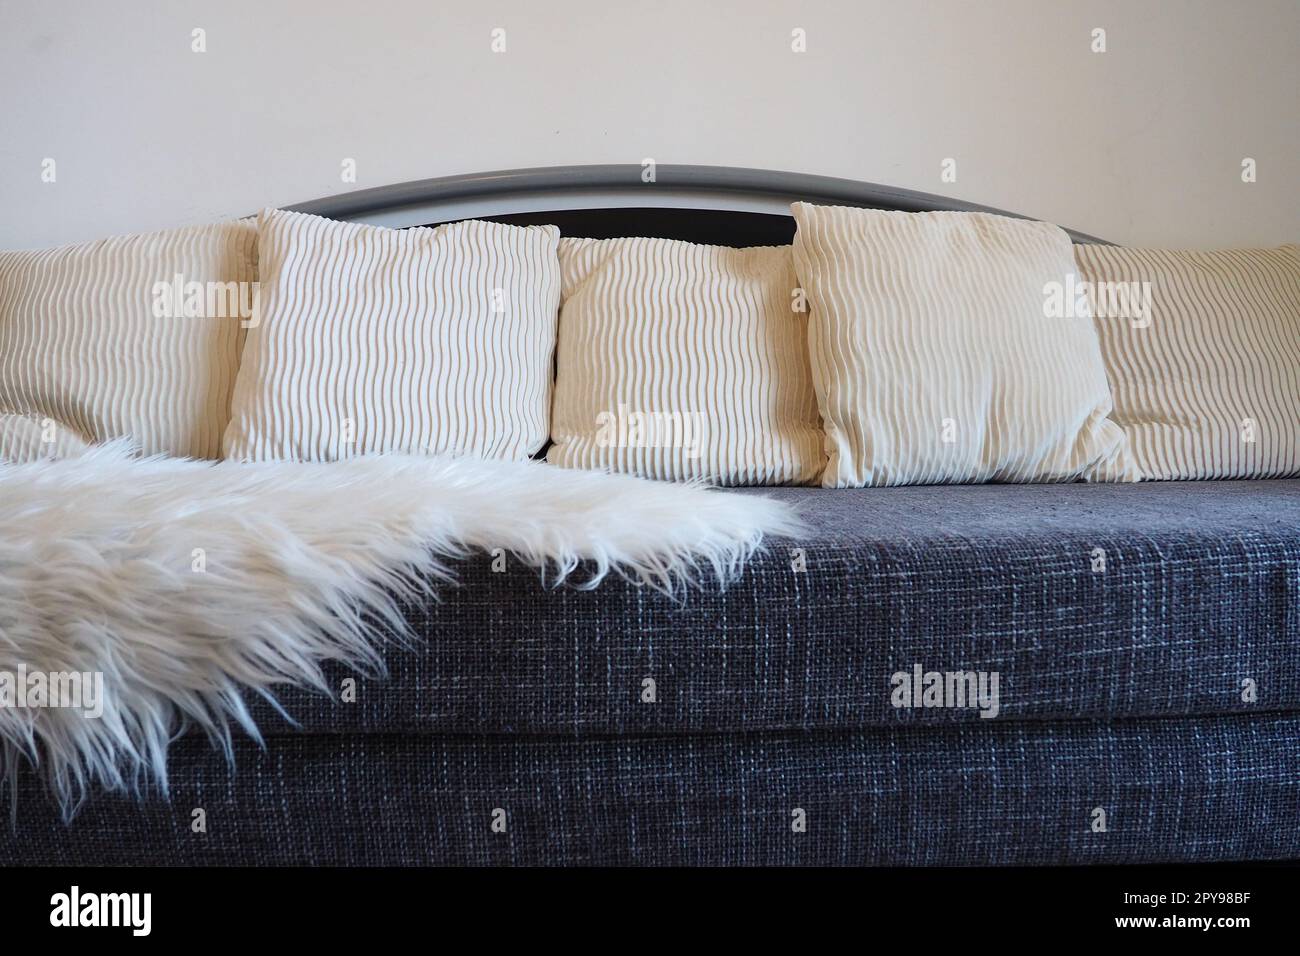 Gray sofa with rough upholstery fabric boucle and white decorative fluted cushions. A long pile white faux fur rug or coverlet is thrown over the seat. Living room interior Stock Photo